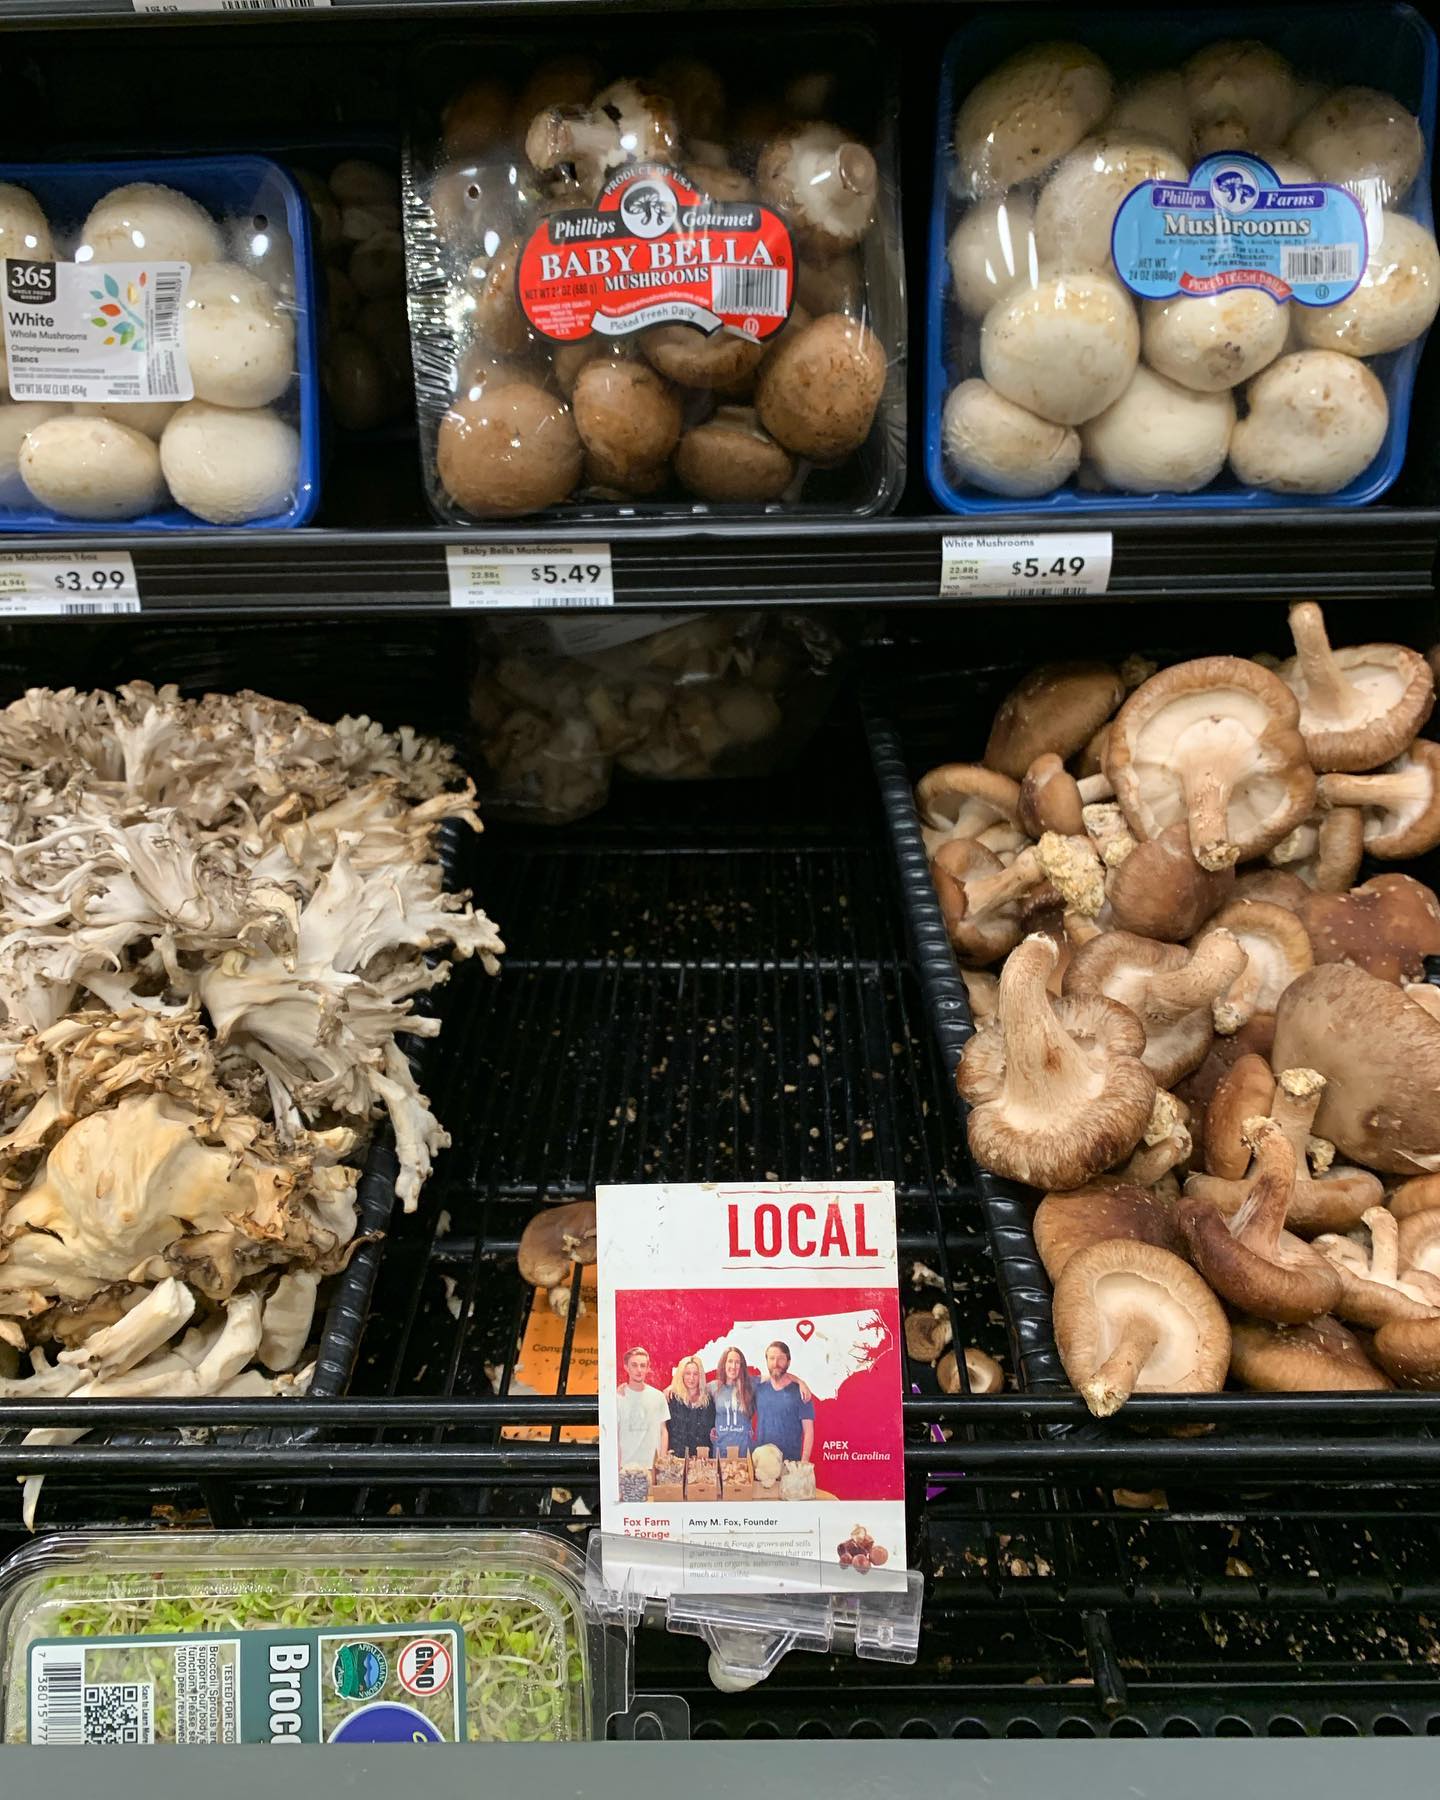 Looks like @wholefoods market customers in Durham like the good shiit(ake)!!!! ❤️🍄😁 
It appears they’ve still got a good supply of my maitake though. So if anyone is looking to source some, there ya go!
I love it when people send me pics of where they find my product. ❤️❤️❤️